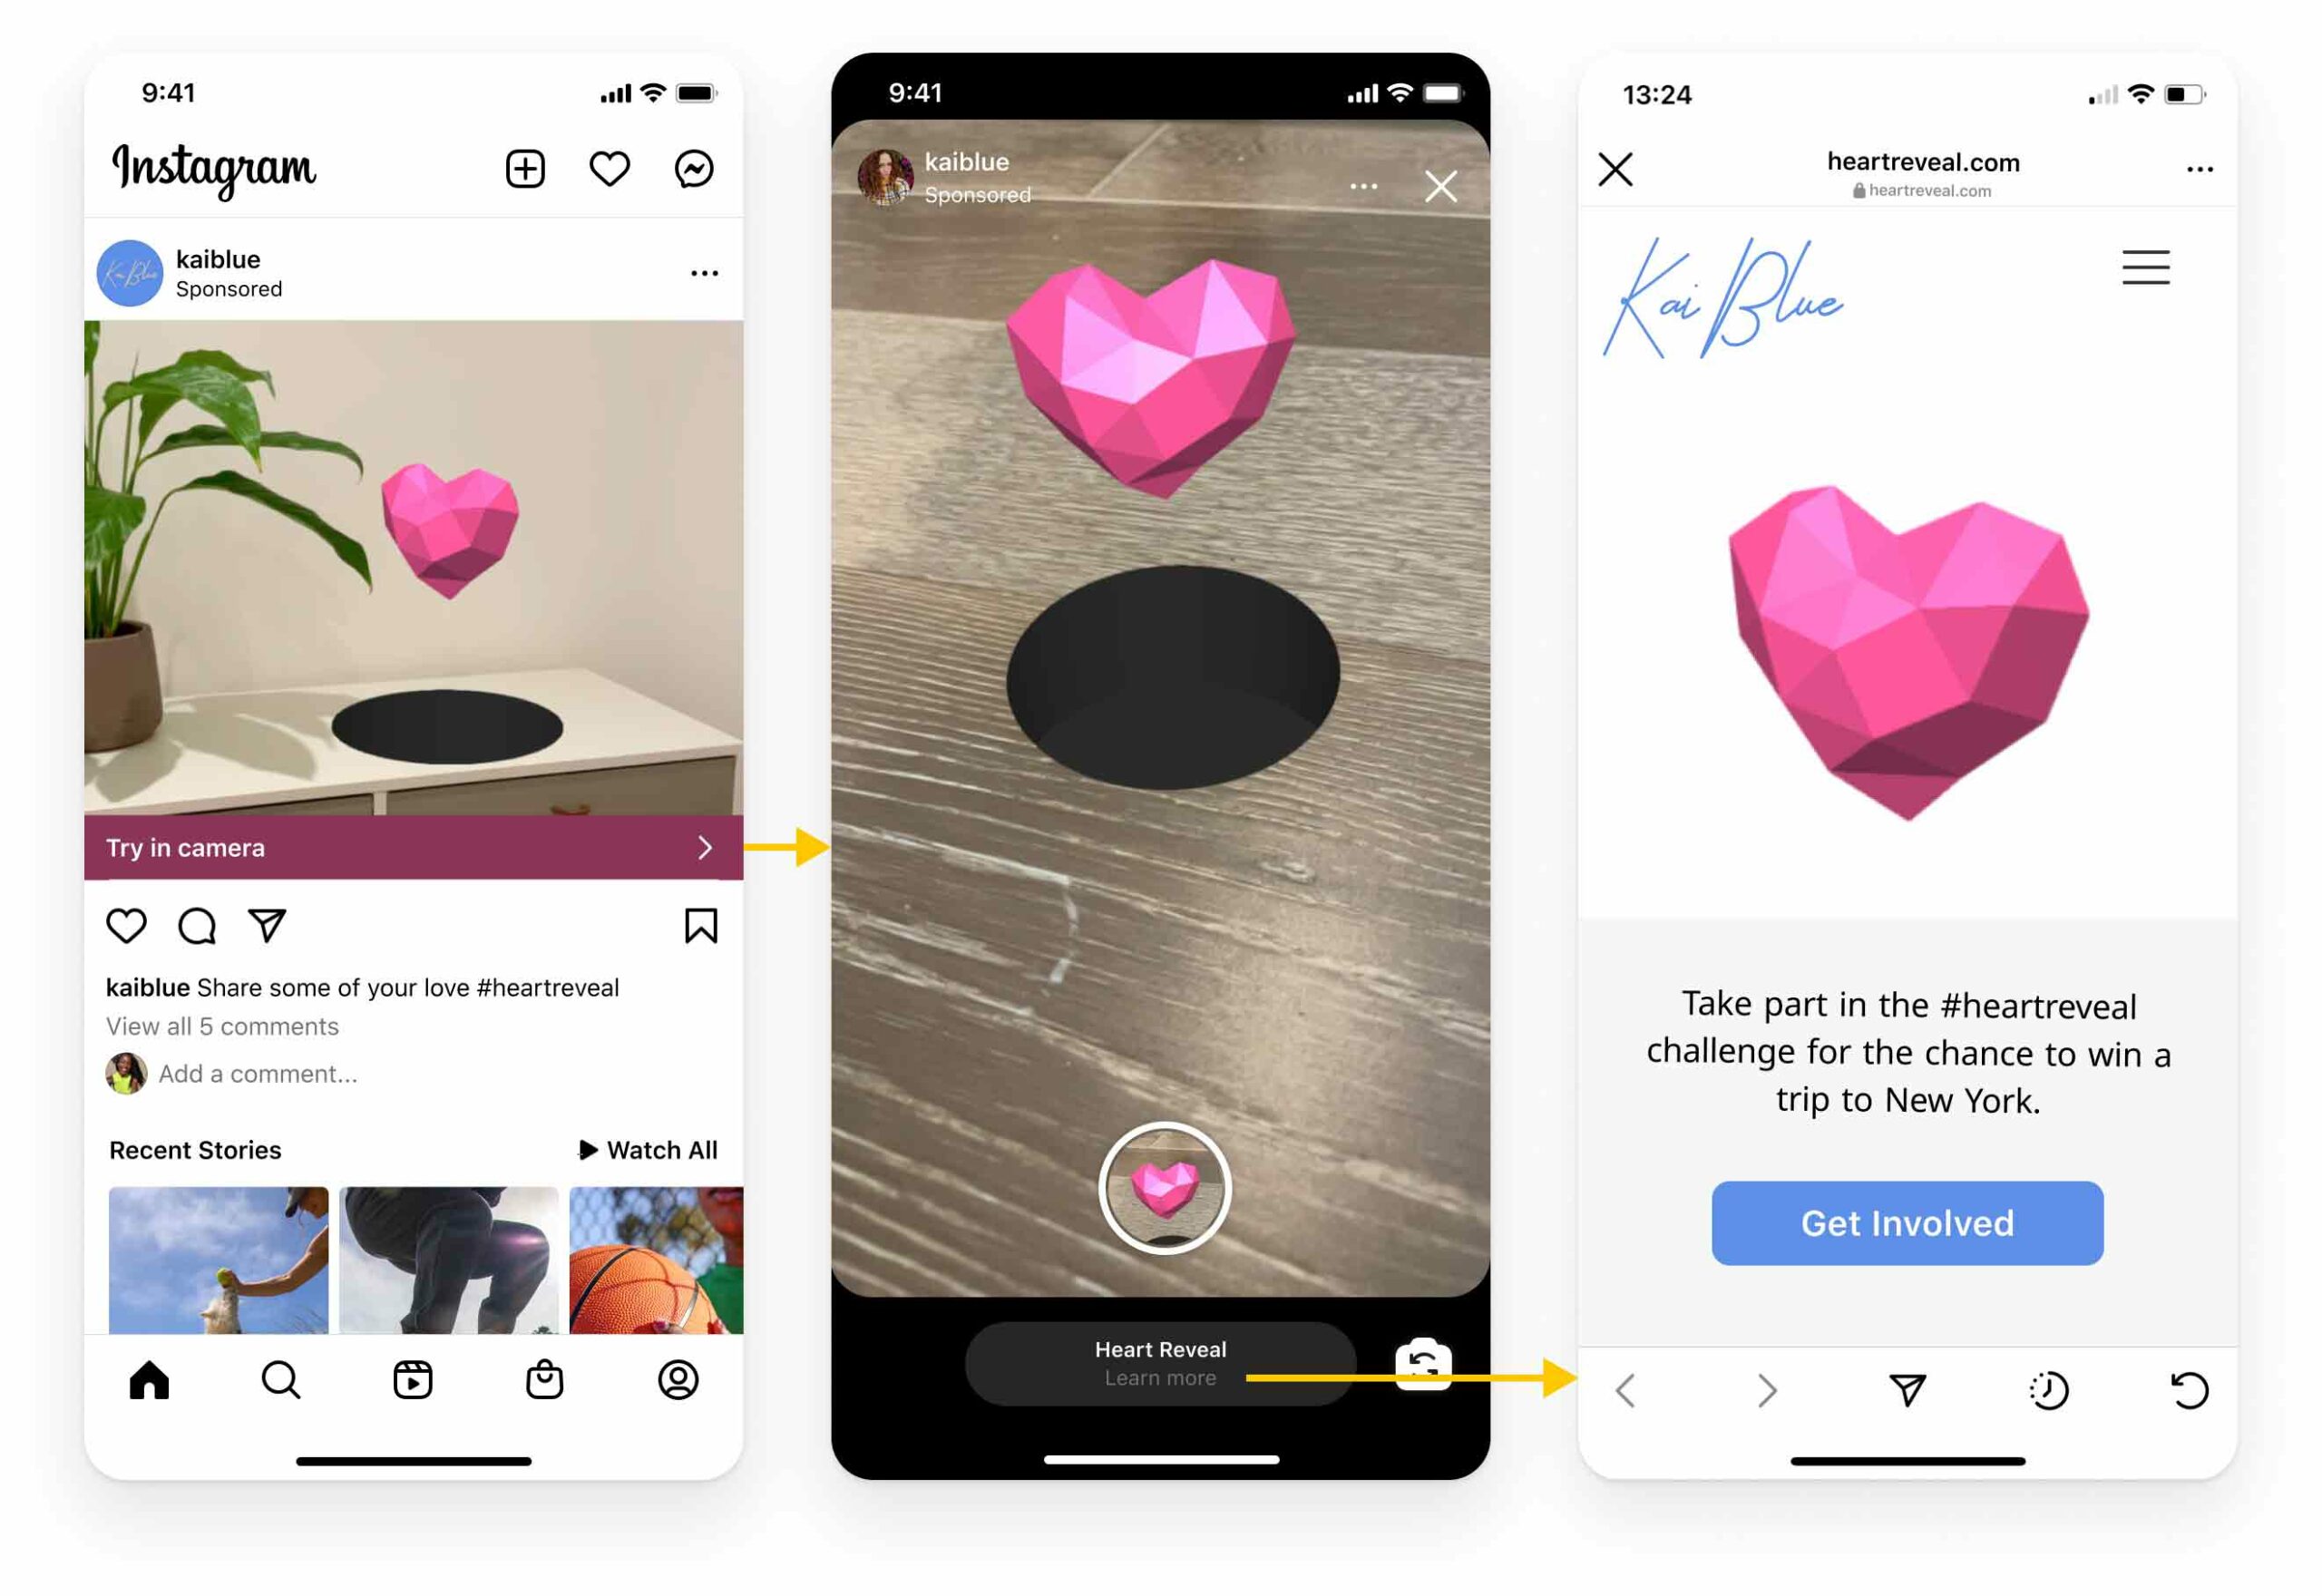 Instagram is placing ads on your feed